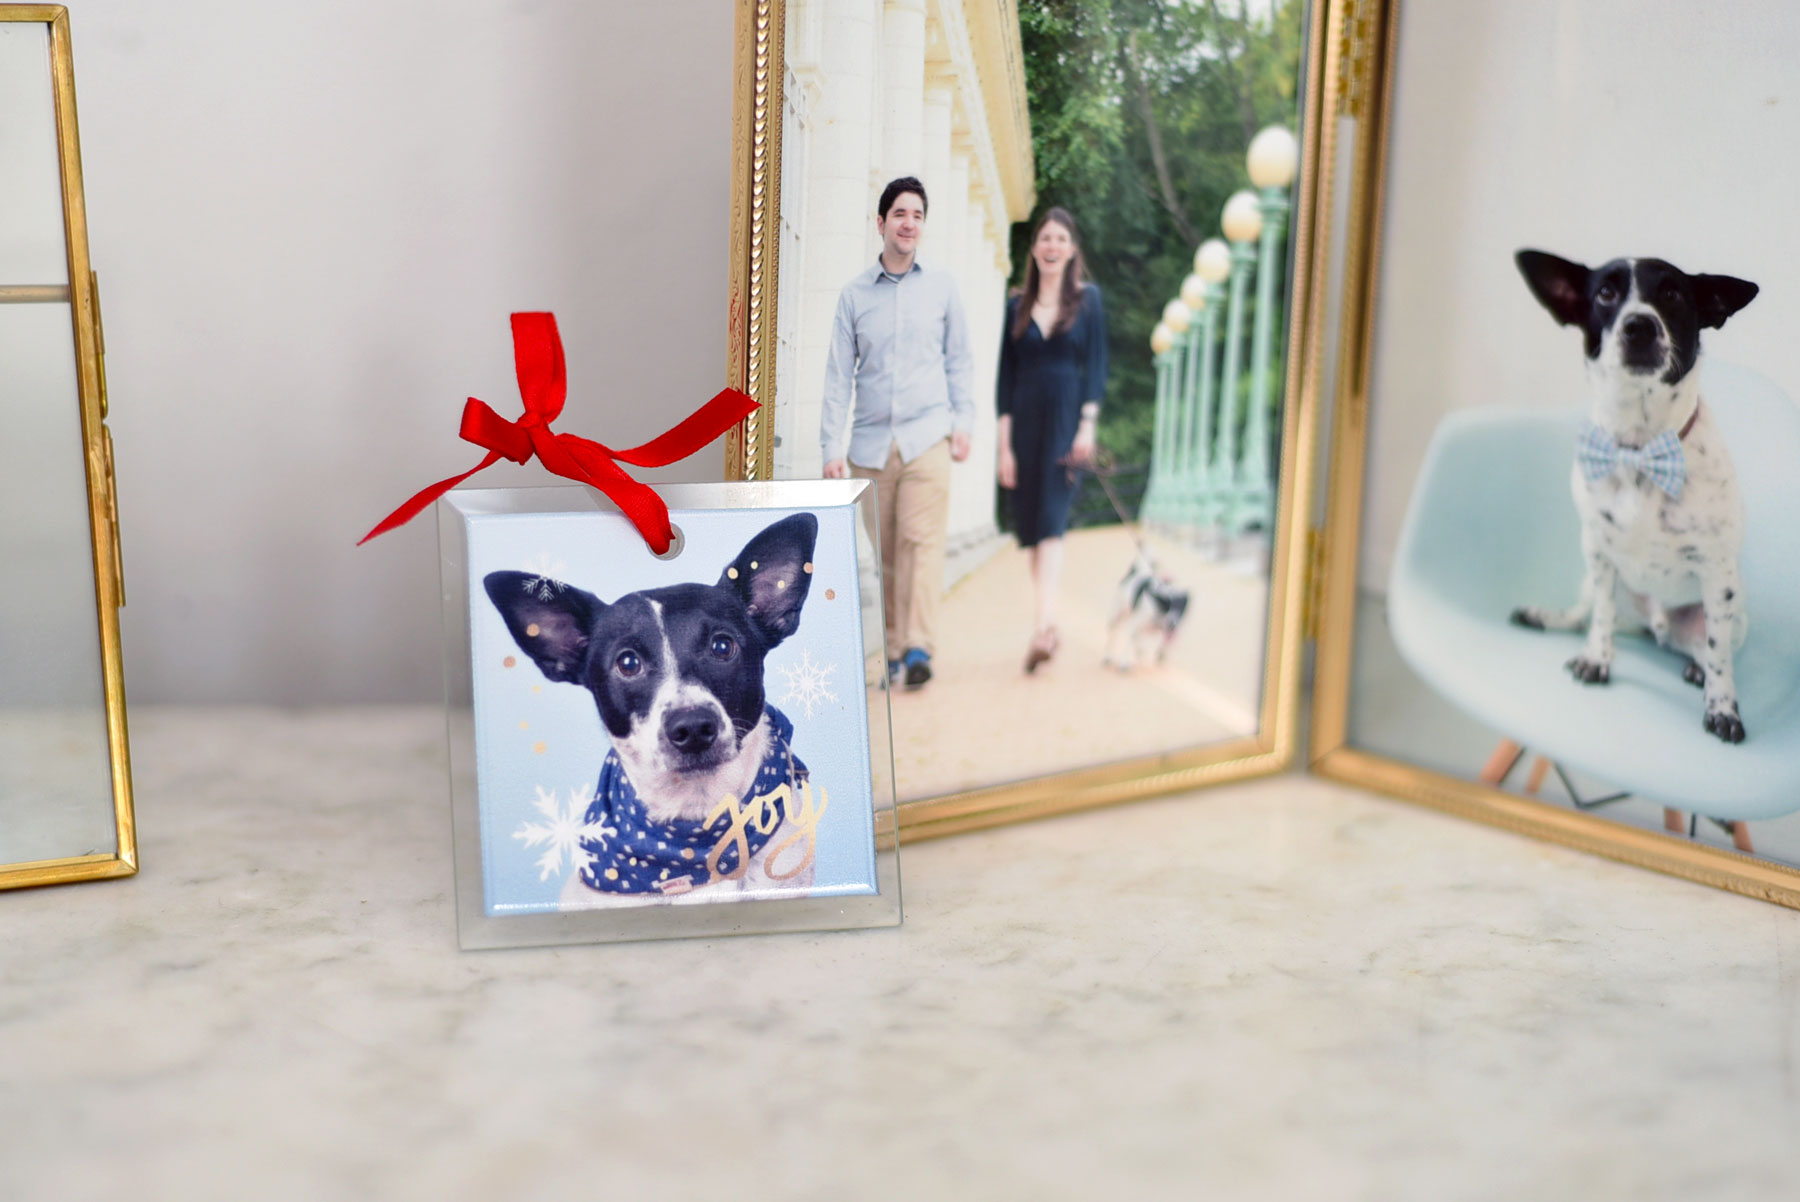 Sick of burying your favorite dog photos on your hard drive? Snapfish offers affordable and adorable photo gifts for pet lovers!